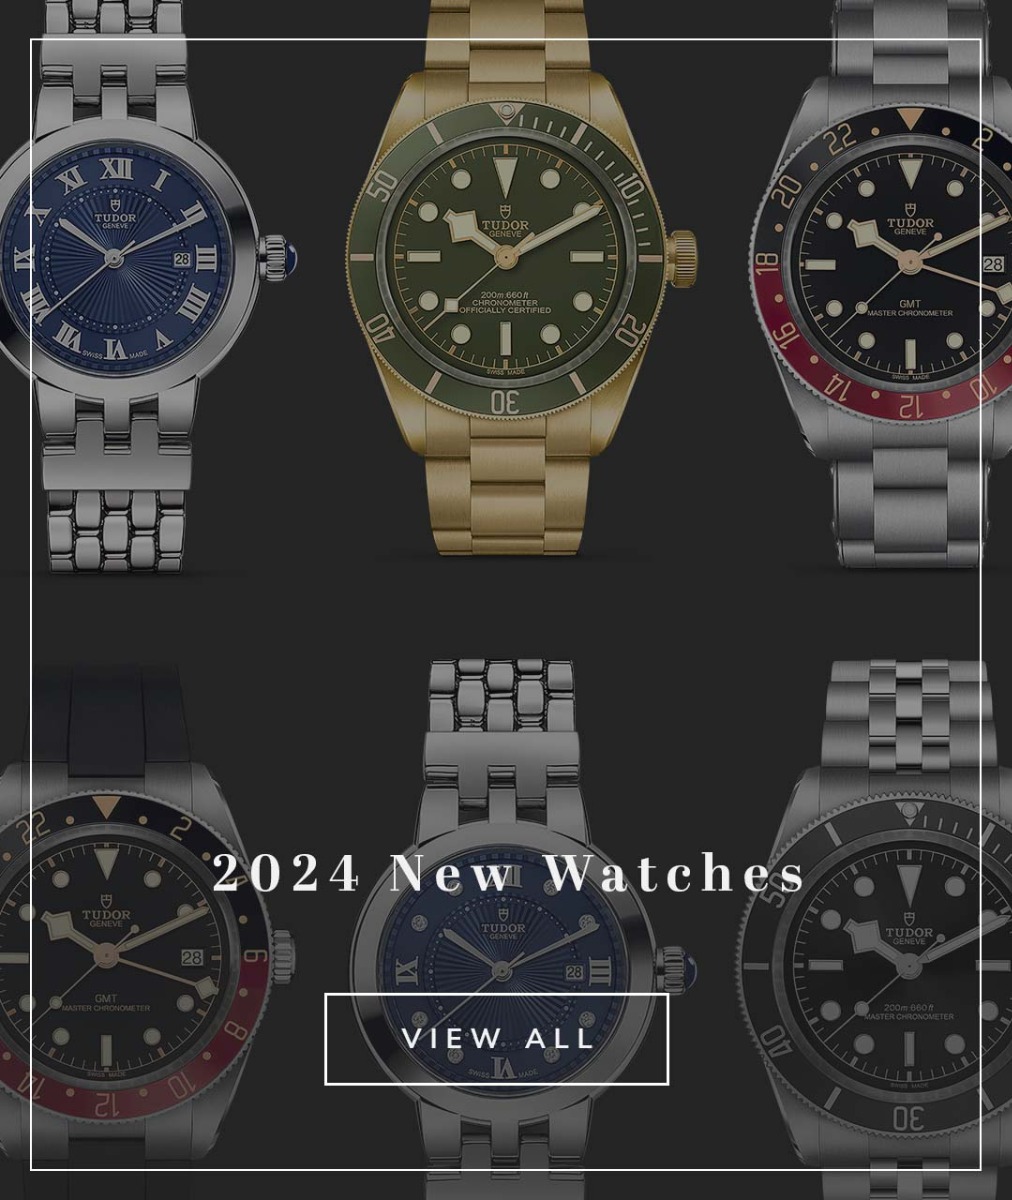 Several tudor watches with text shop now